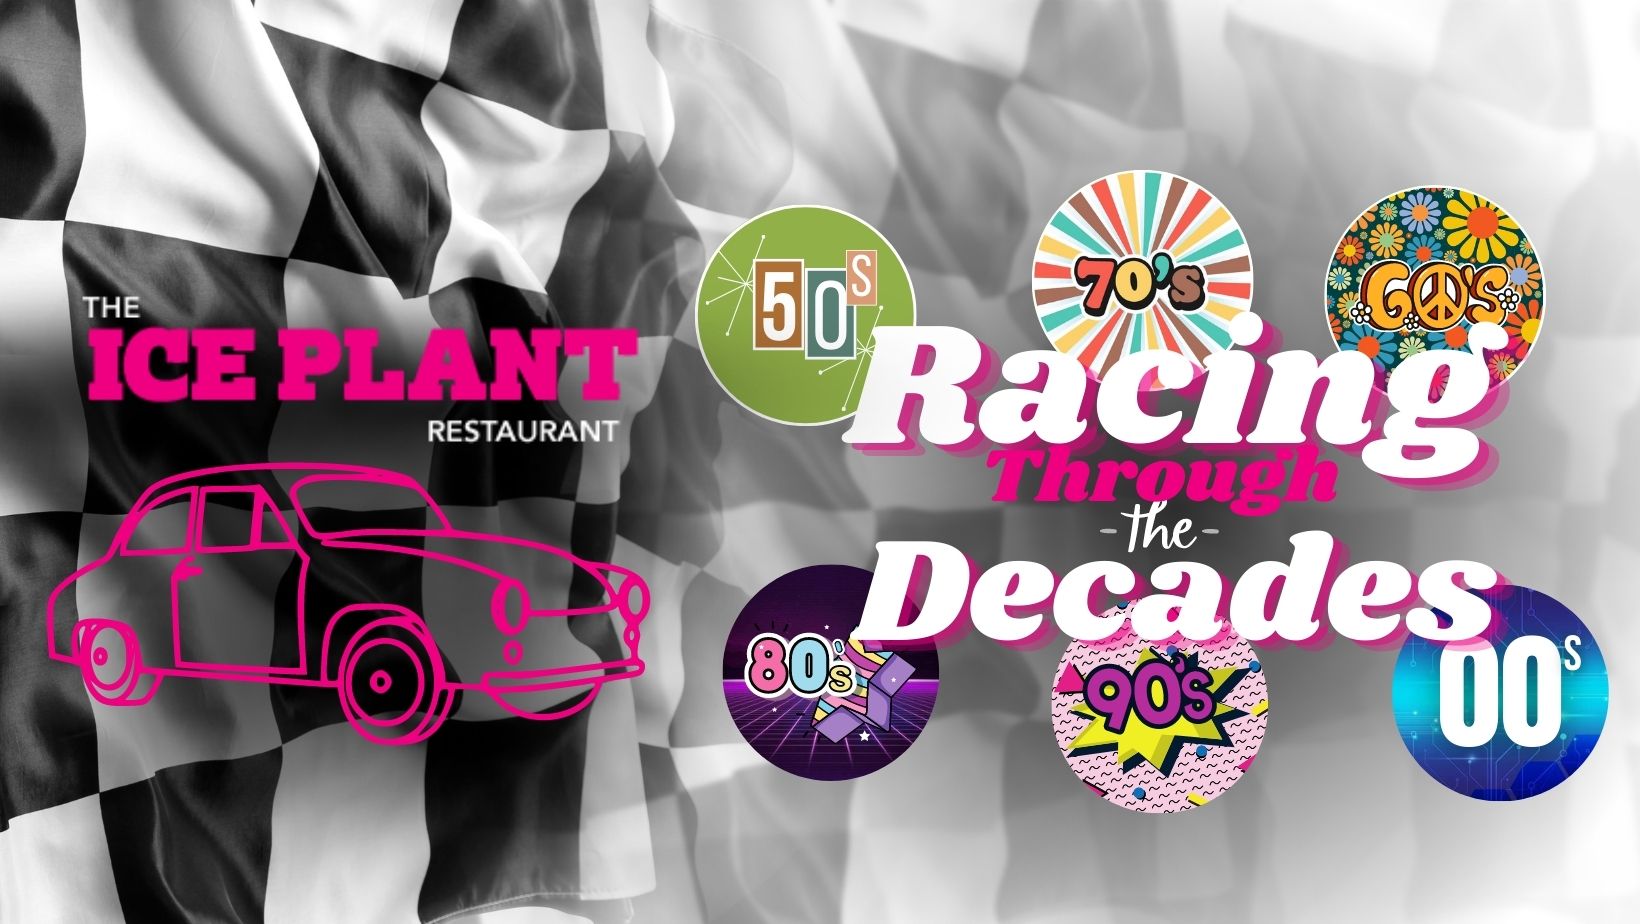 The Ice Plant Restraunt "Racing Through the Decades"